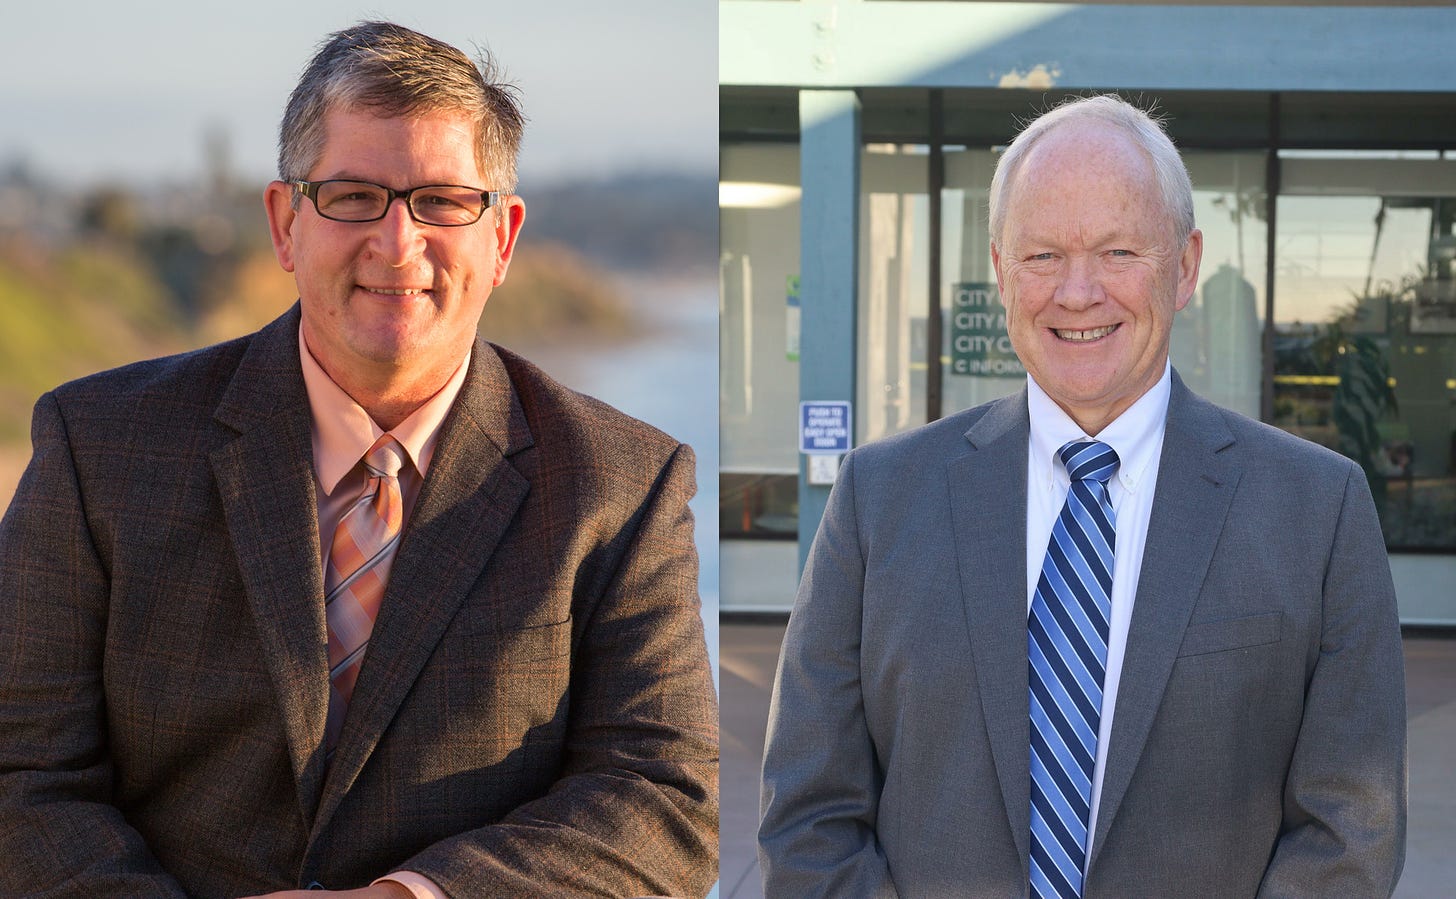 Encinitas Mayor Tony Kranz, left, and Councilman Bruch Ehlers will face each other in the 2024 mayoral race. Courtesy image